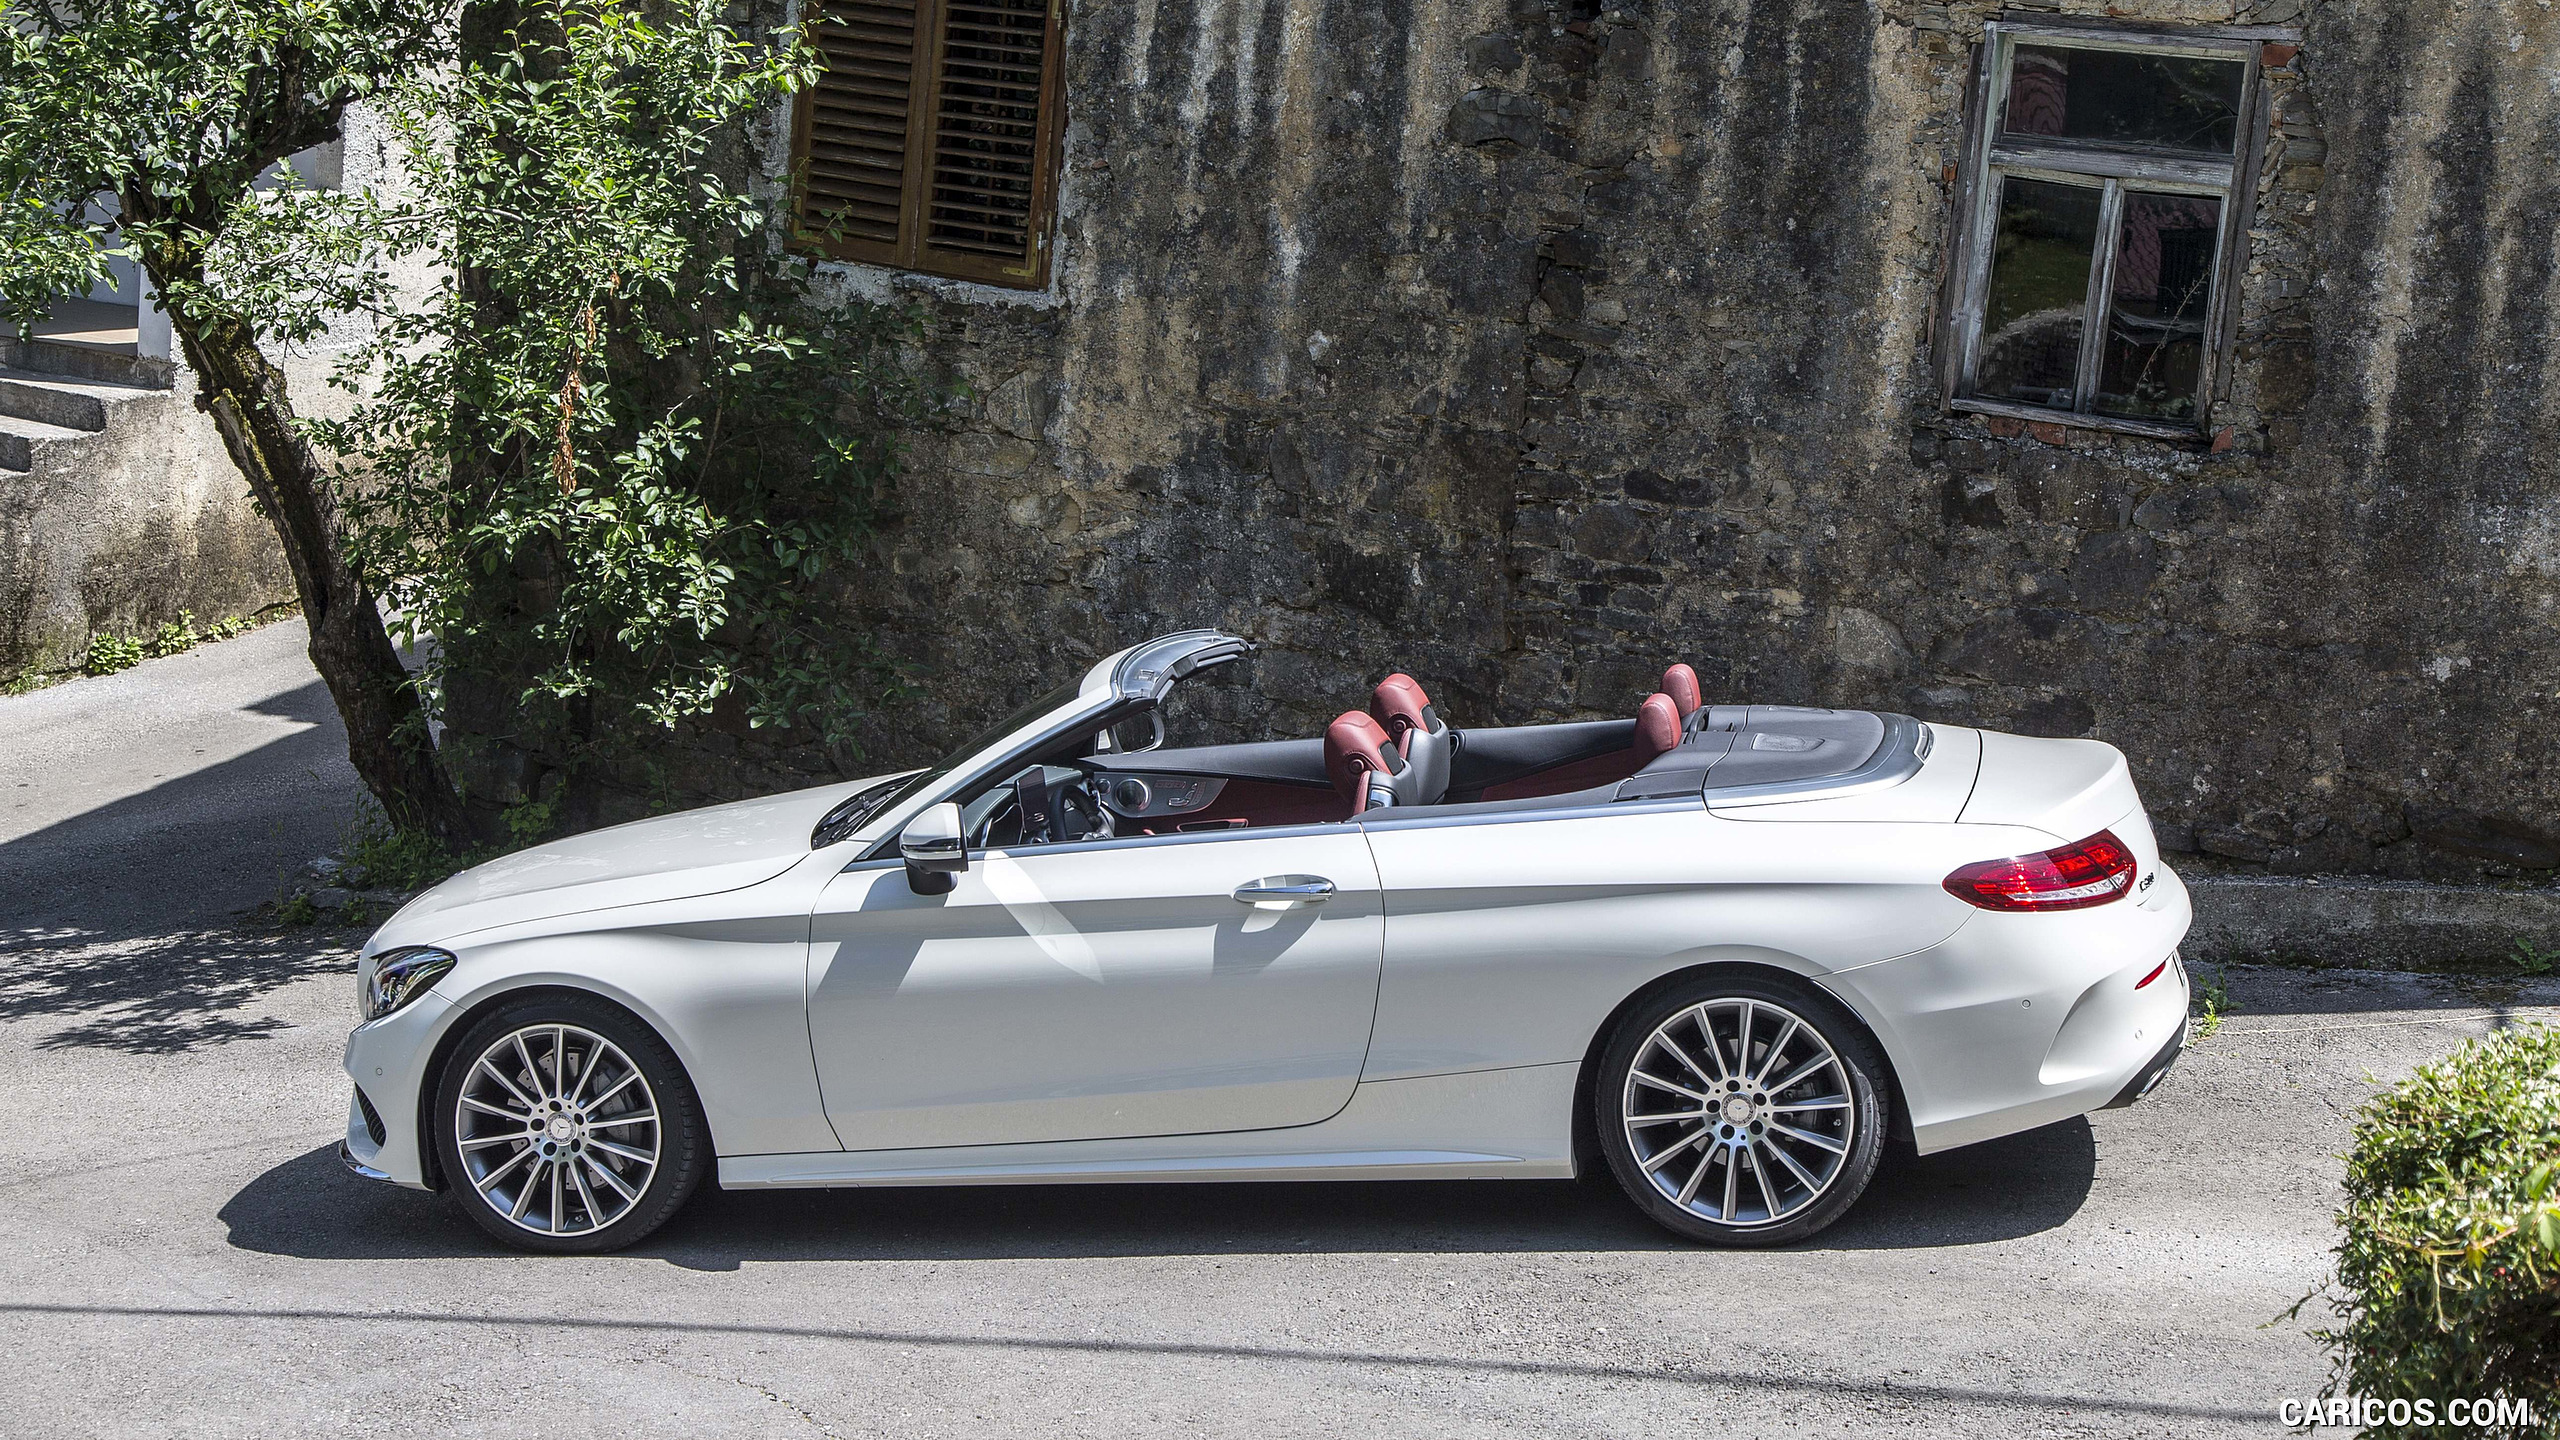 2017 Mercedes-Benz C-Class C300 Cabriolet - Side, #65 of 96